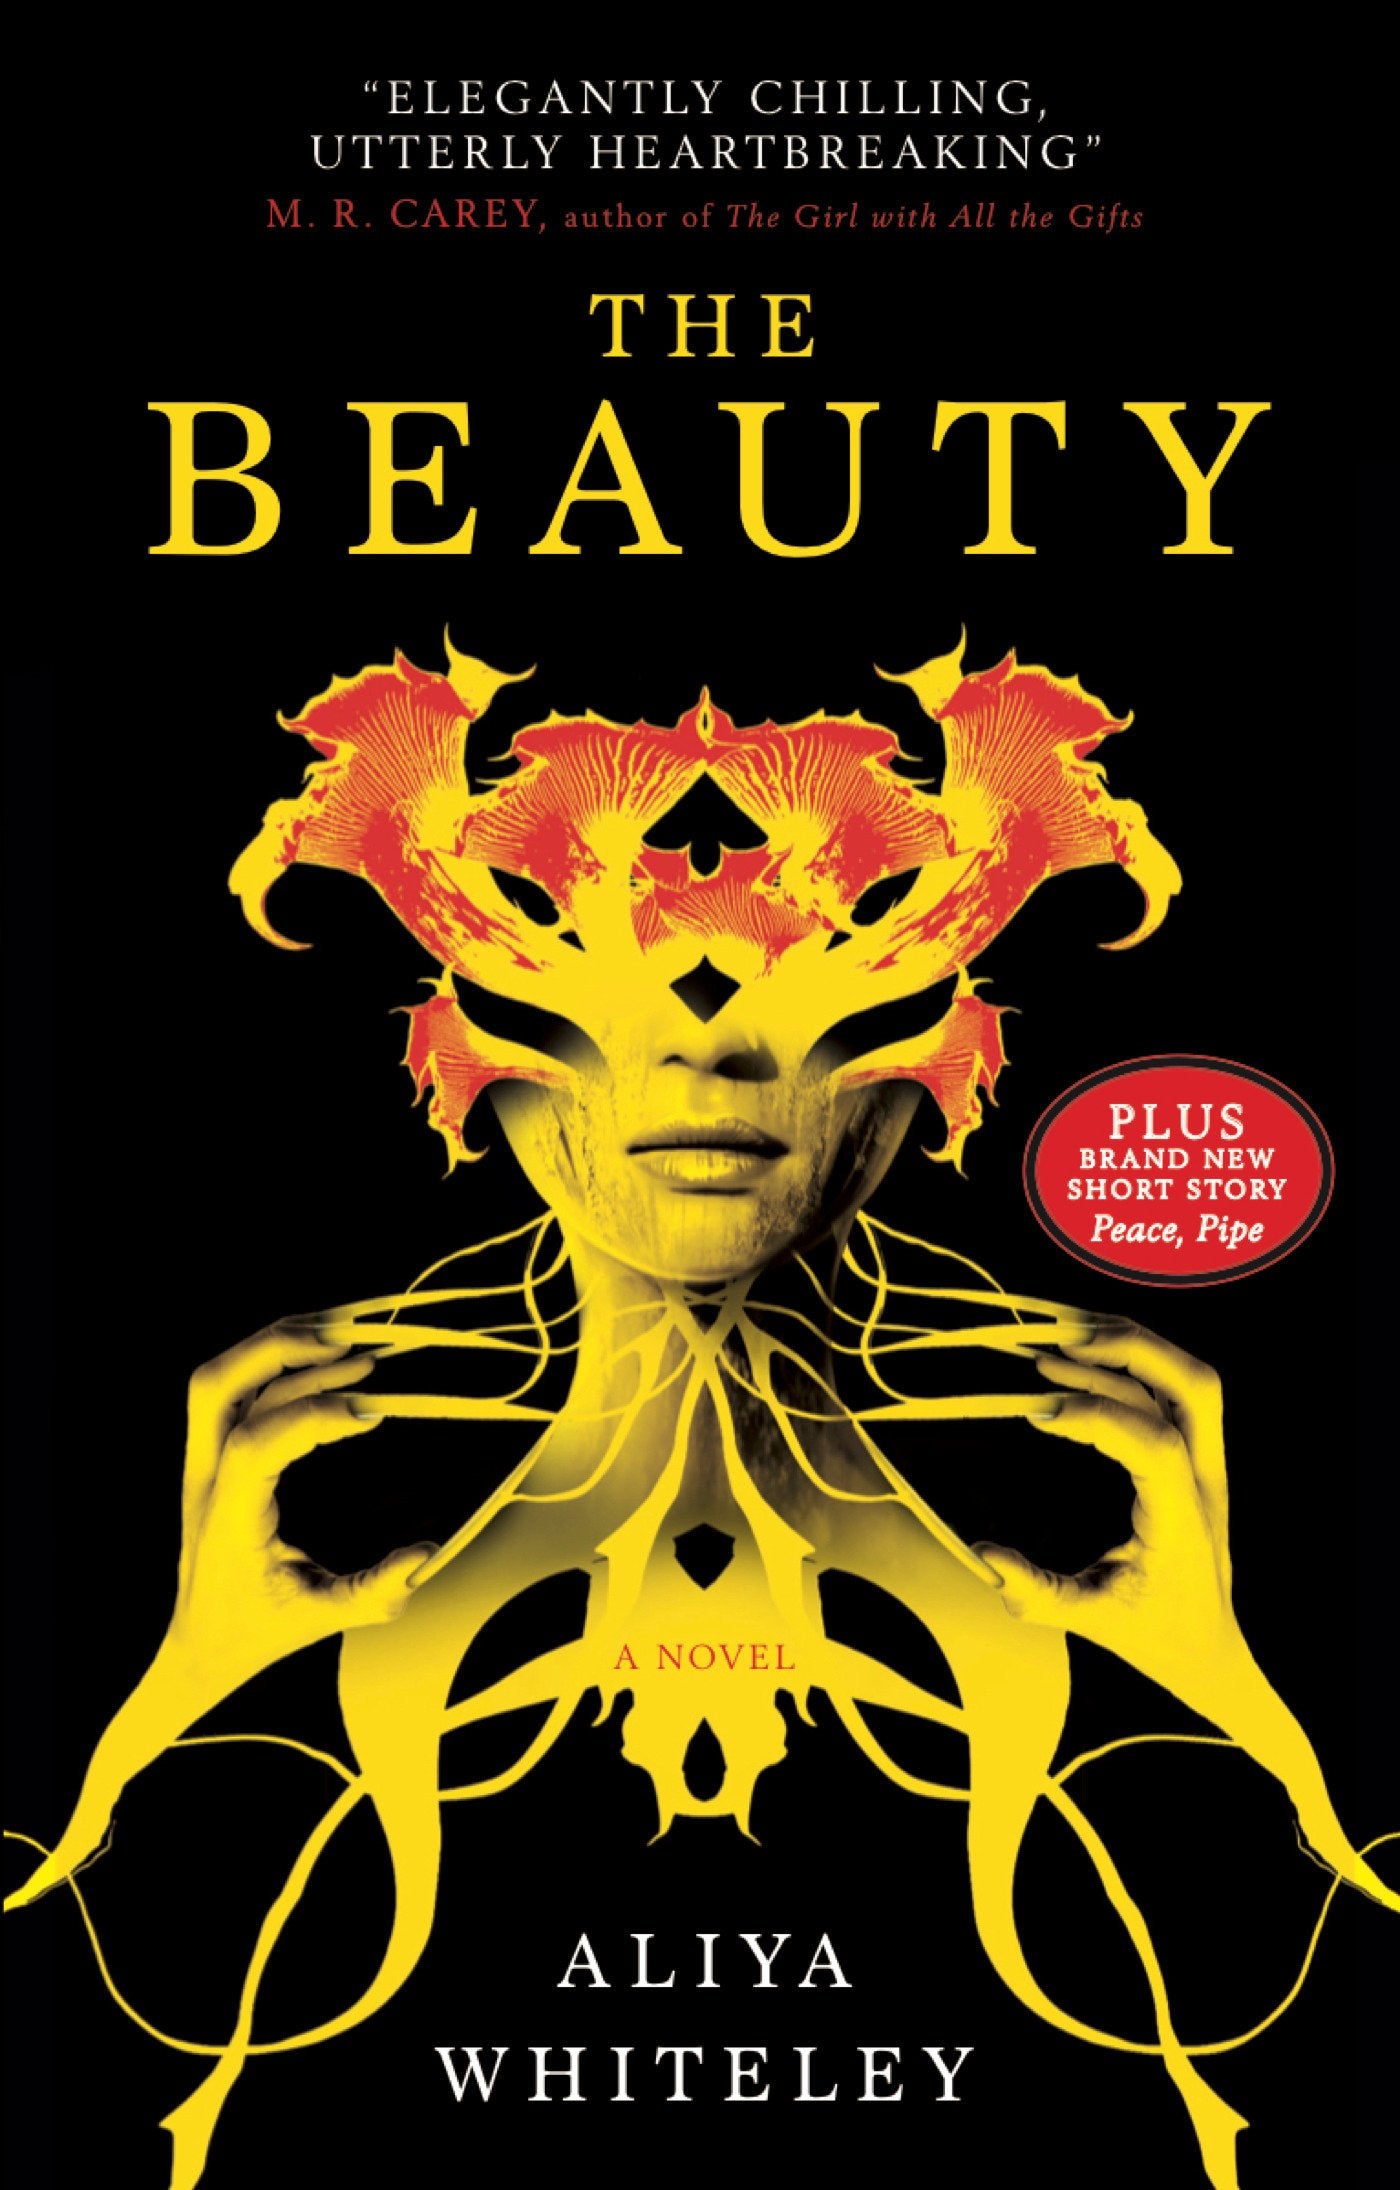 Mindi & Kallie's Side by Side review of THE BEAUTY by Aliya Whiteley